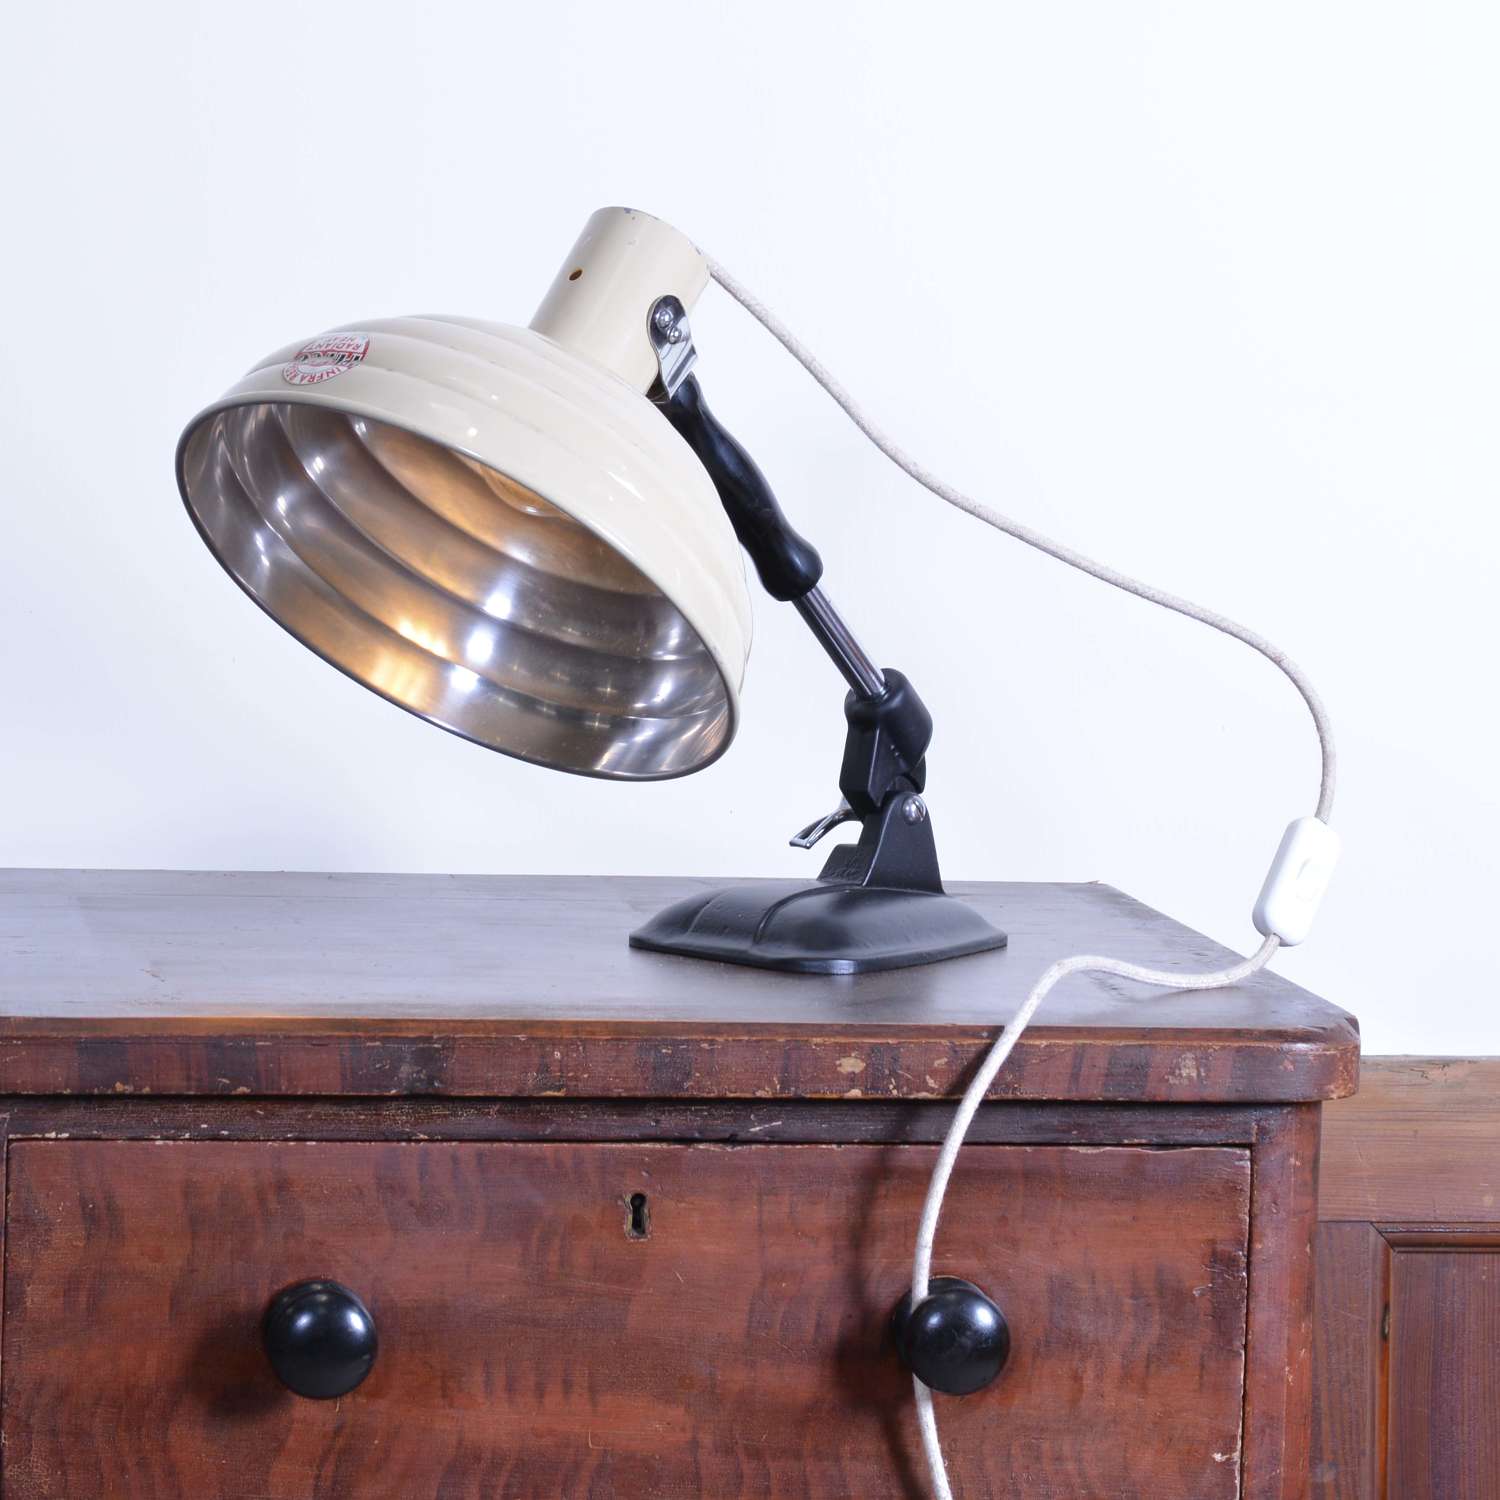 An Infra Red lamp by Pifco